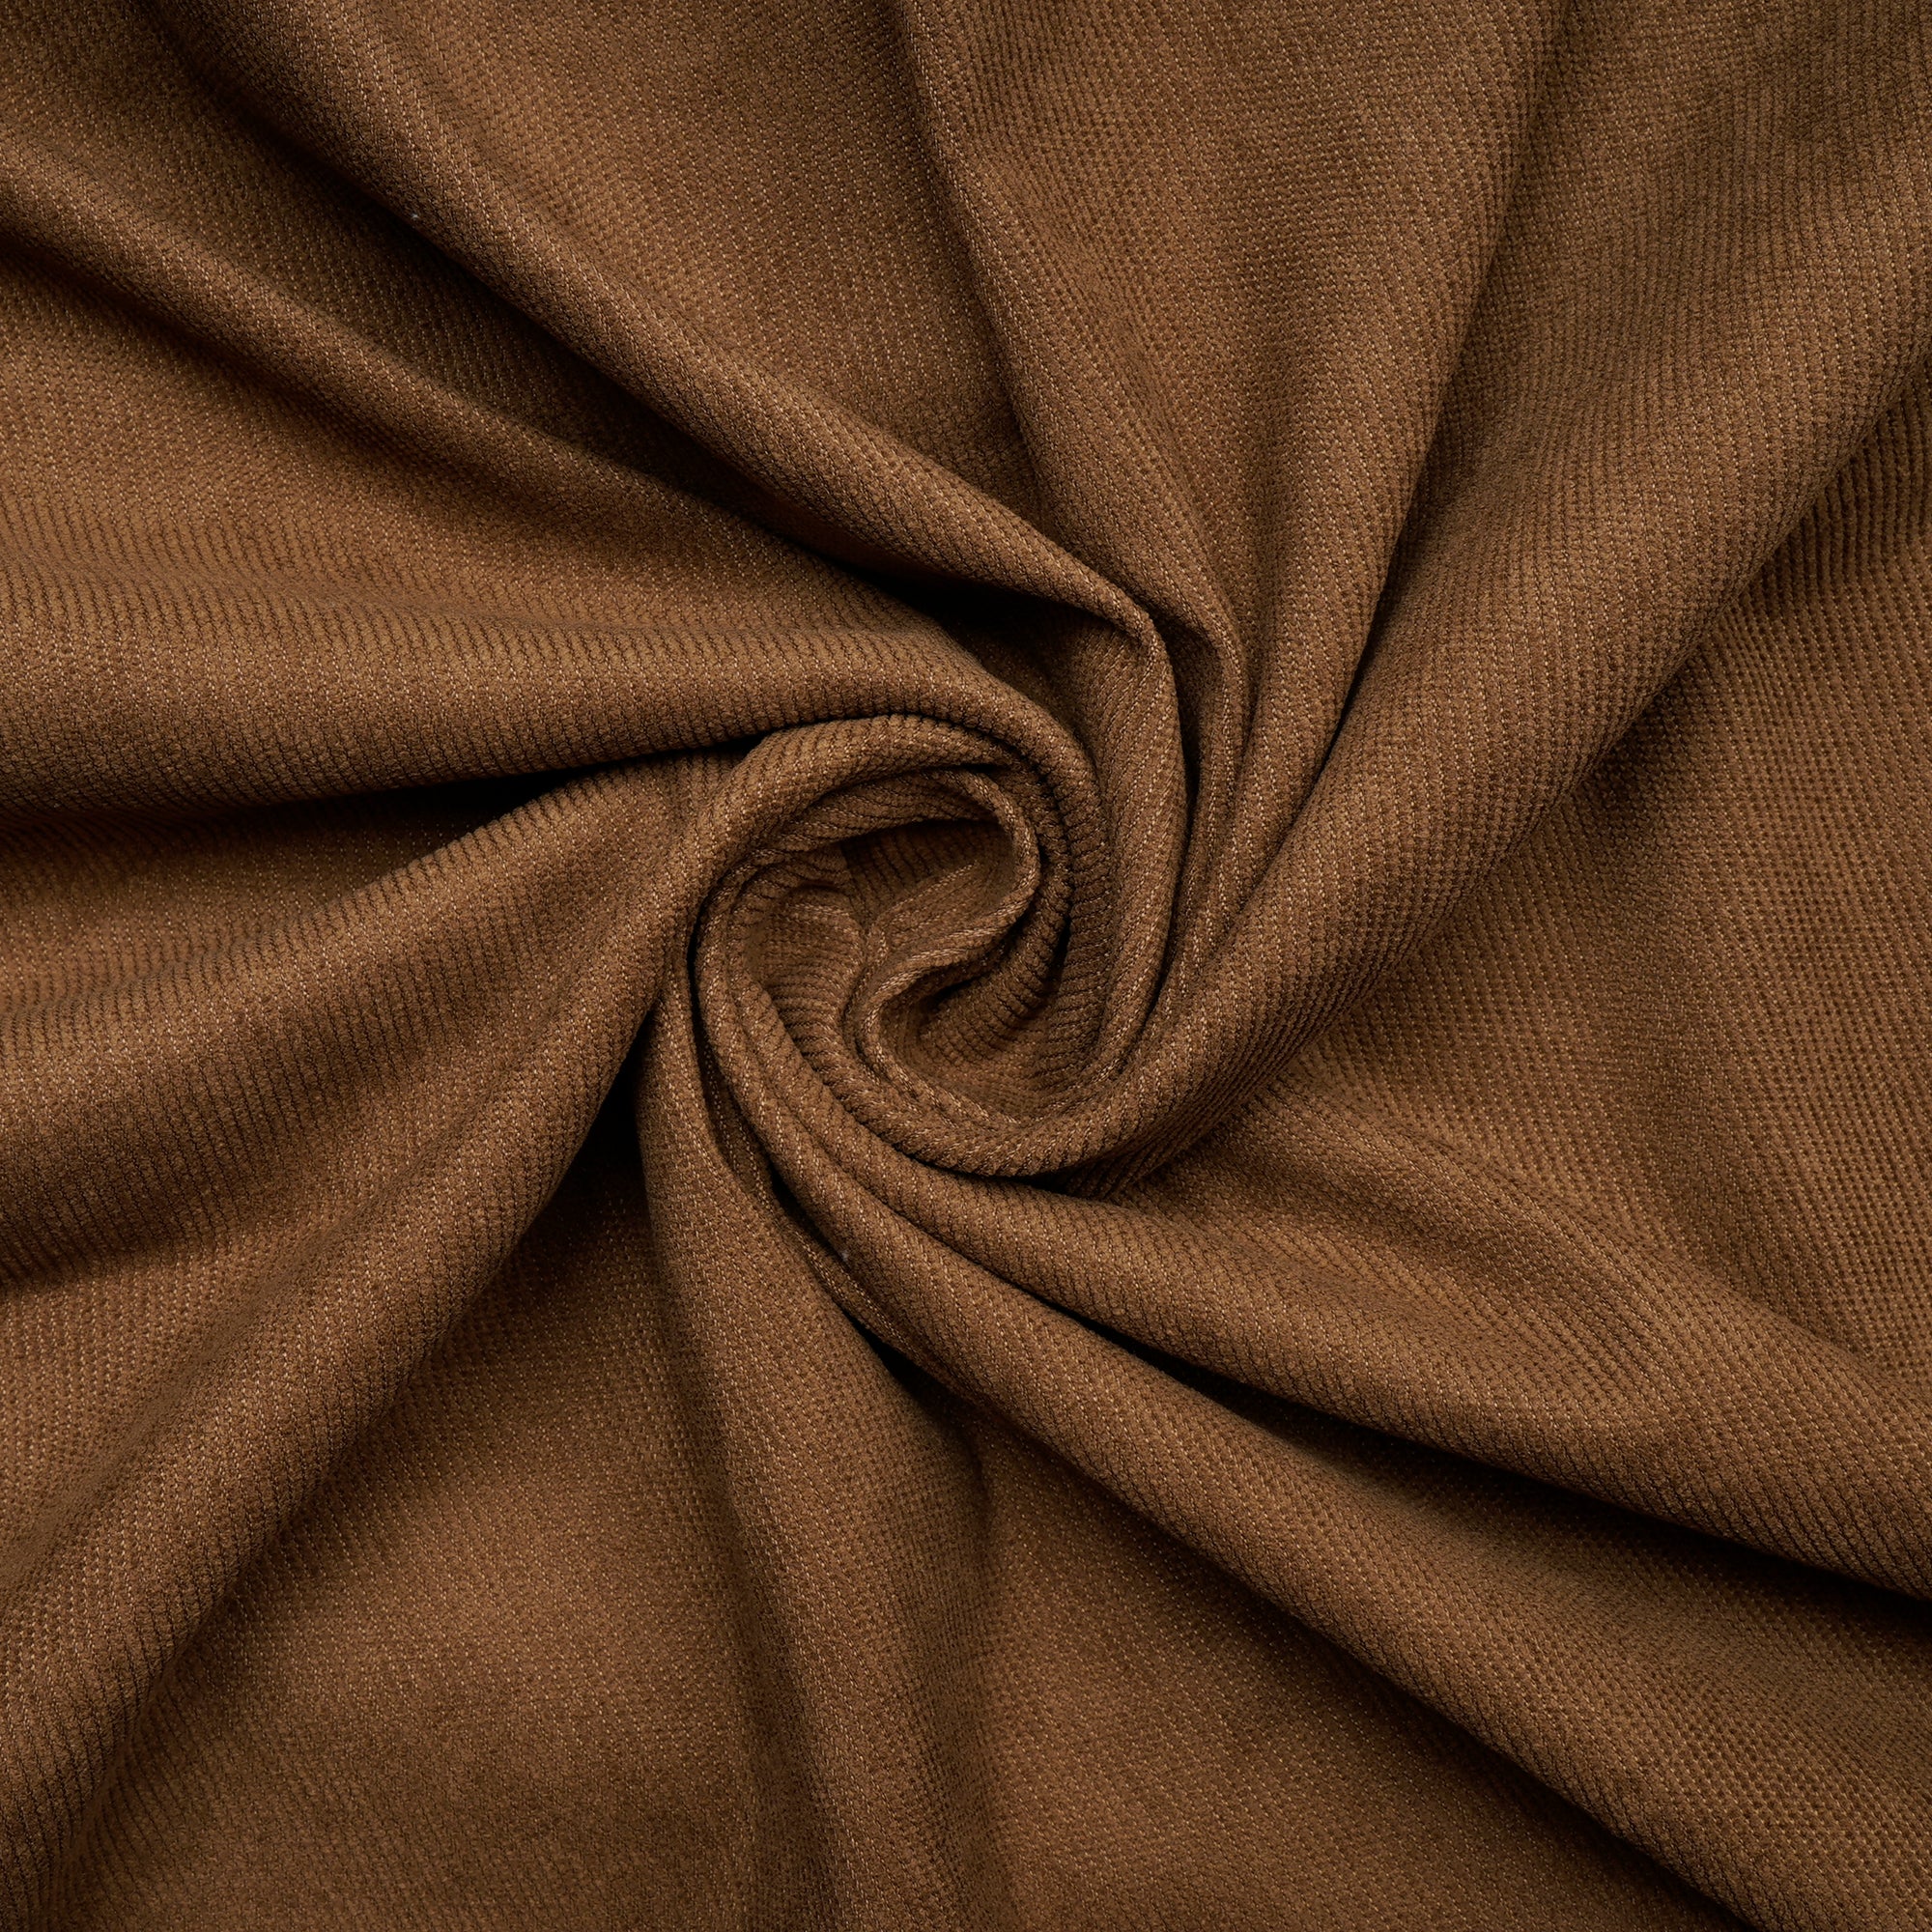 Light Brown Imported Cotton Corduroy Fabric (60" Wide)